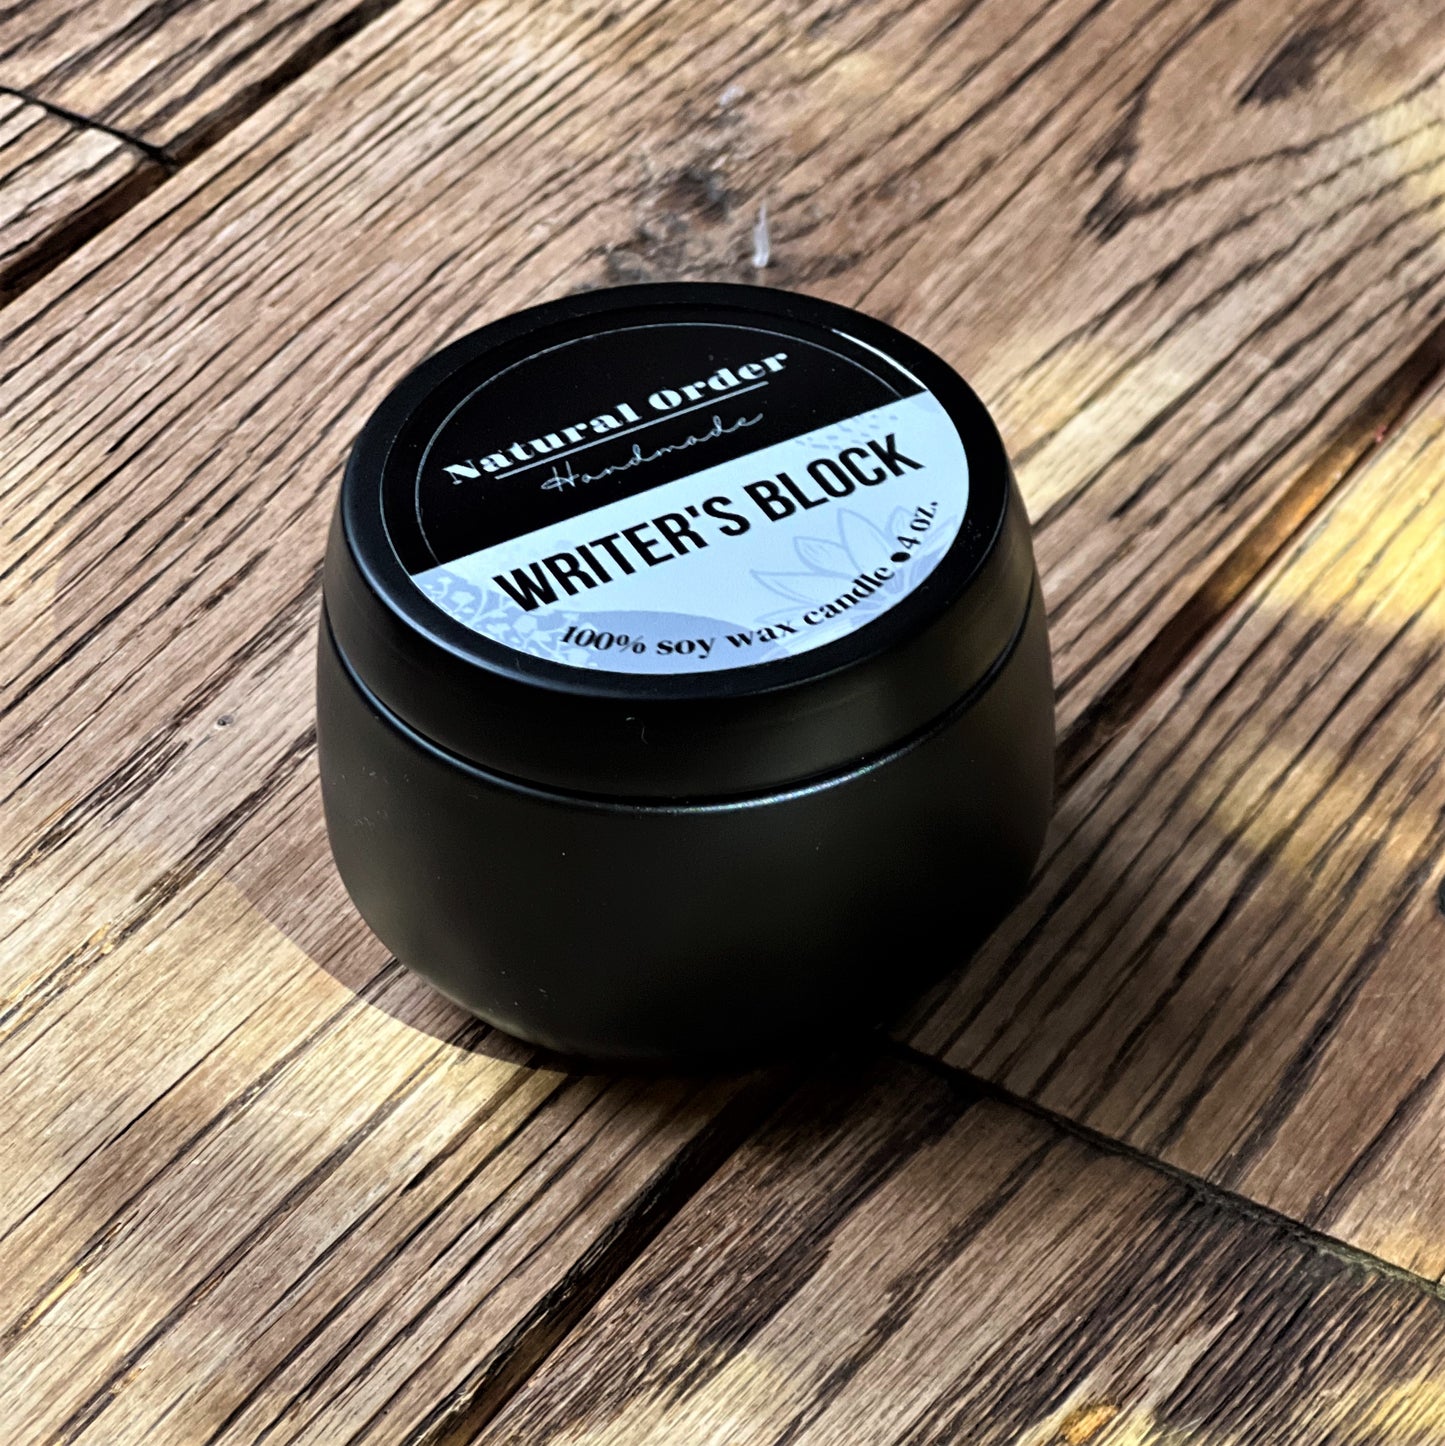 Writer's Block Soy Candle 4 ounce